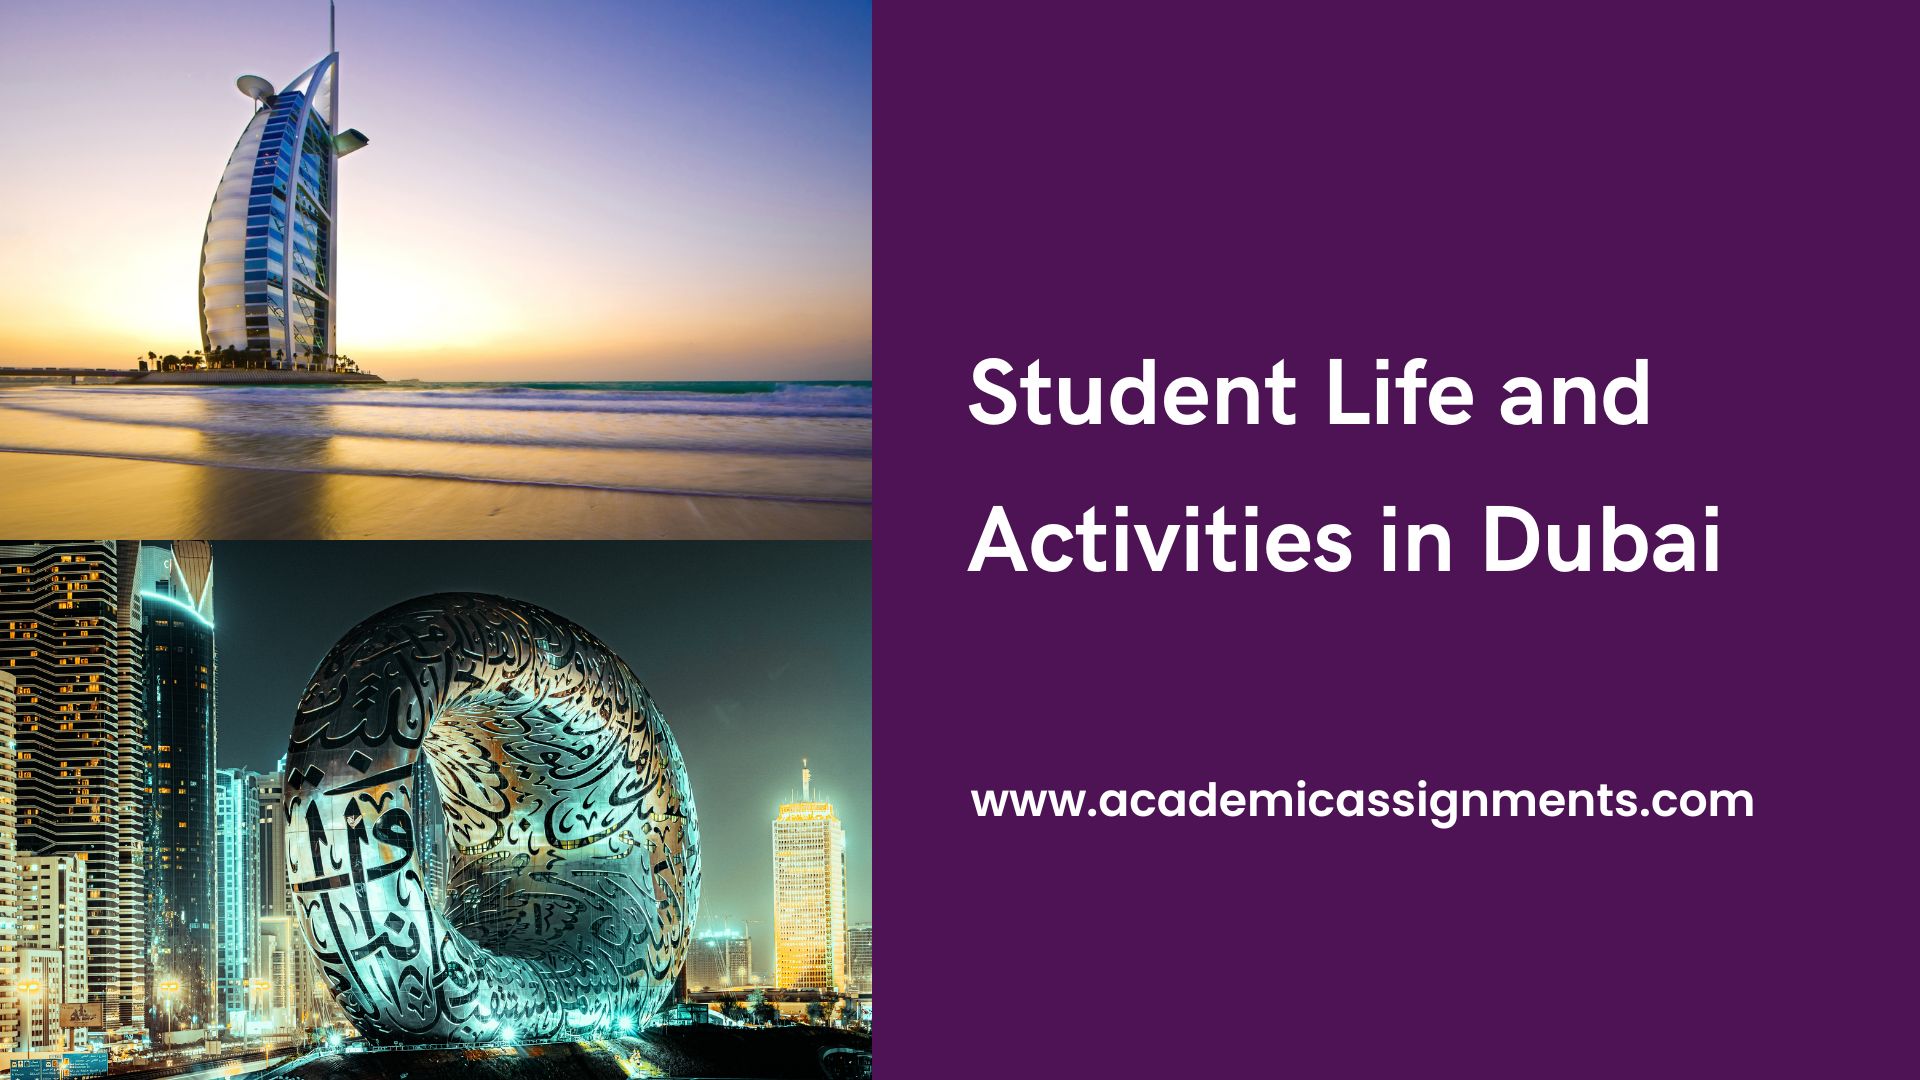 Student Life and Activities in Dubai